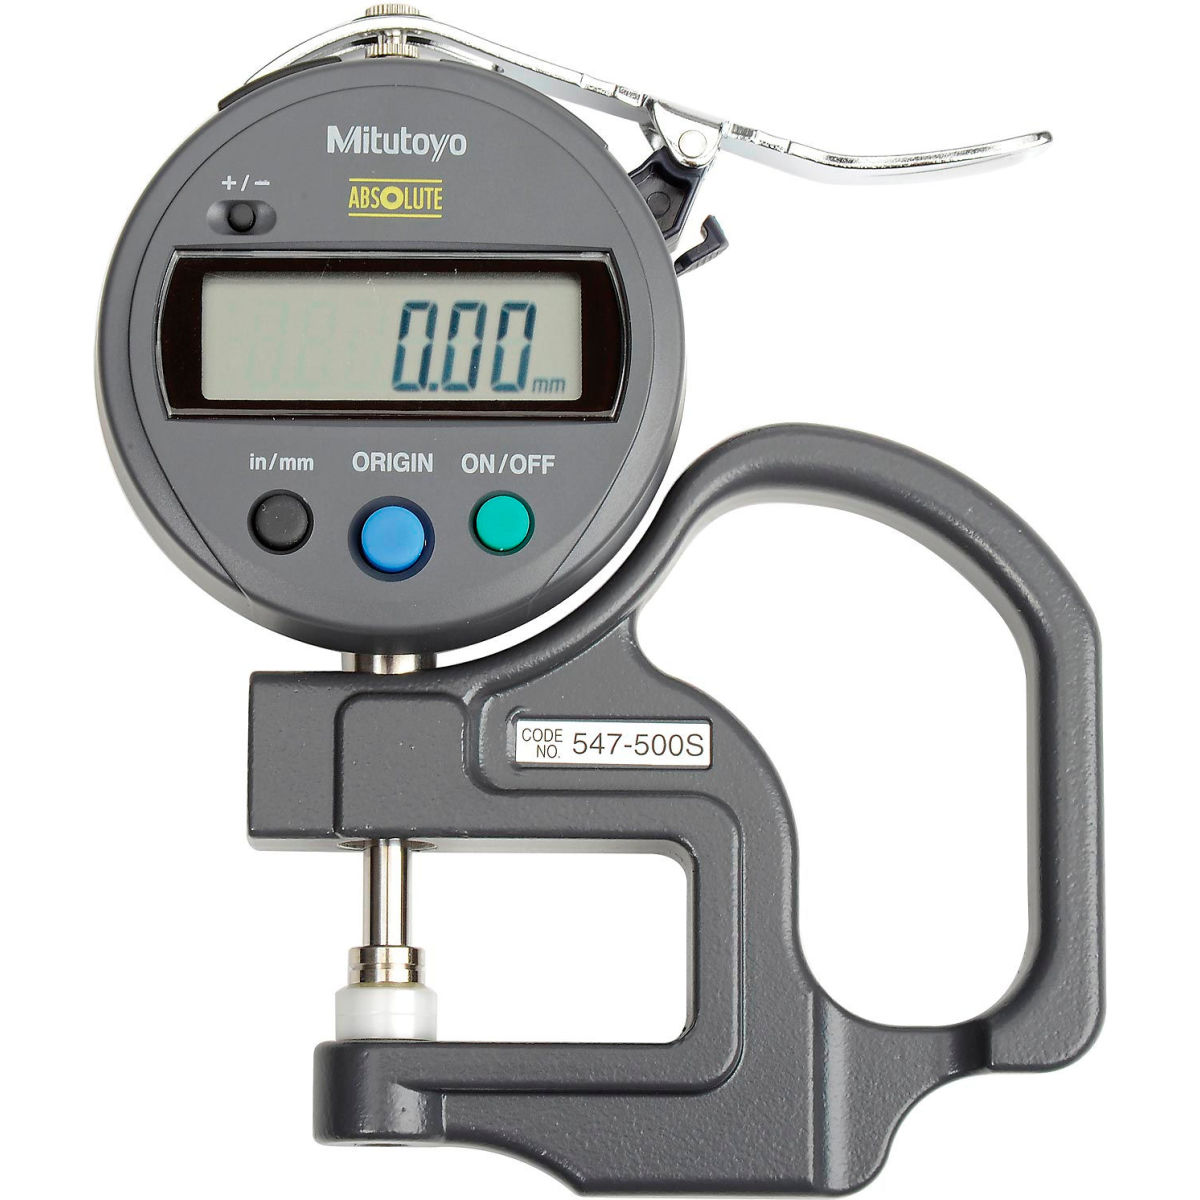 Picture of Mitutoyo America B611447 547-500S 0-0.47 in. & 0-12 mm Digimatic Digital Thickness Gage